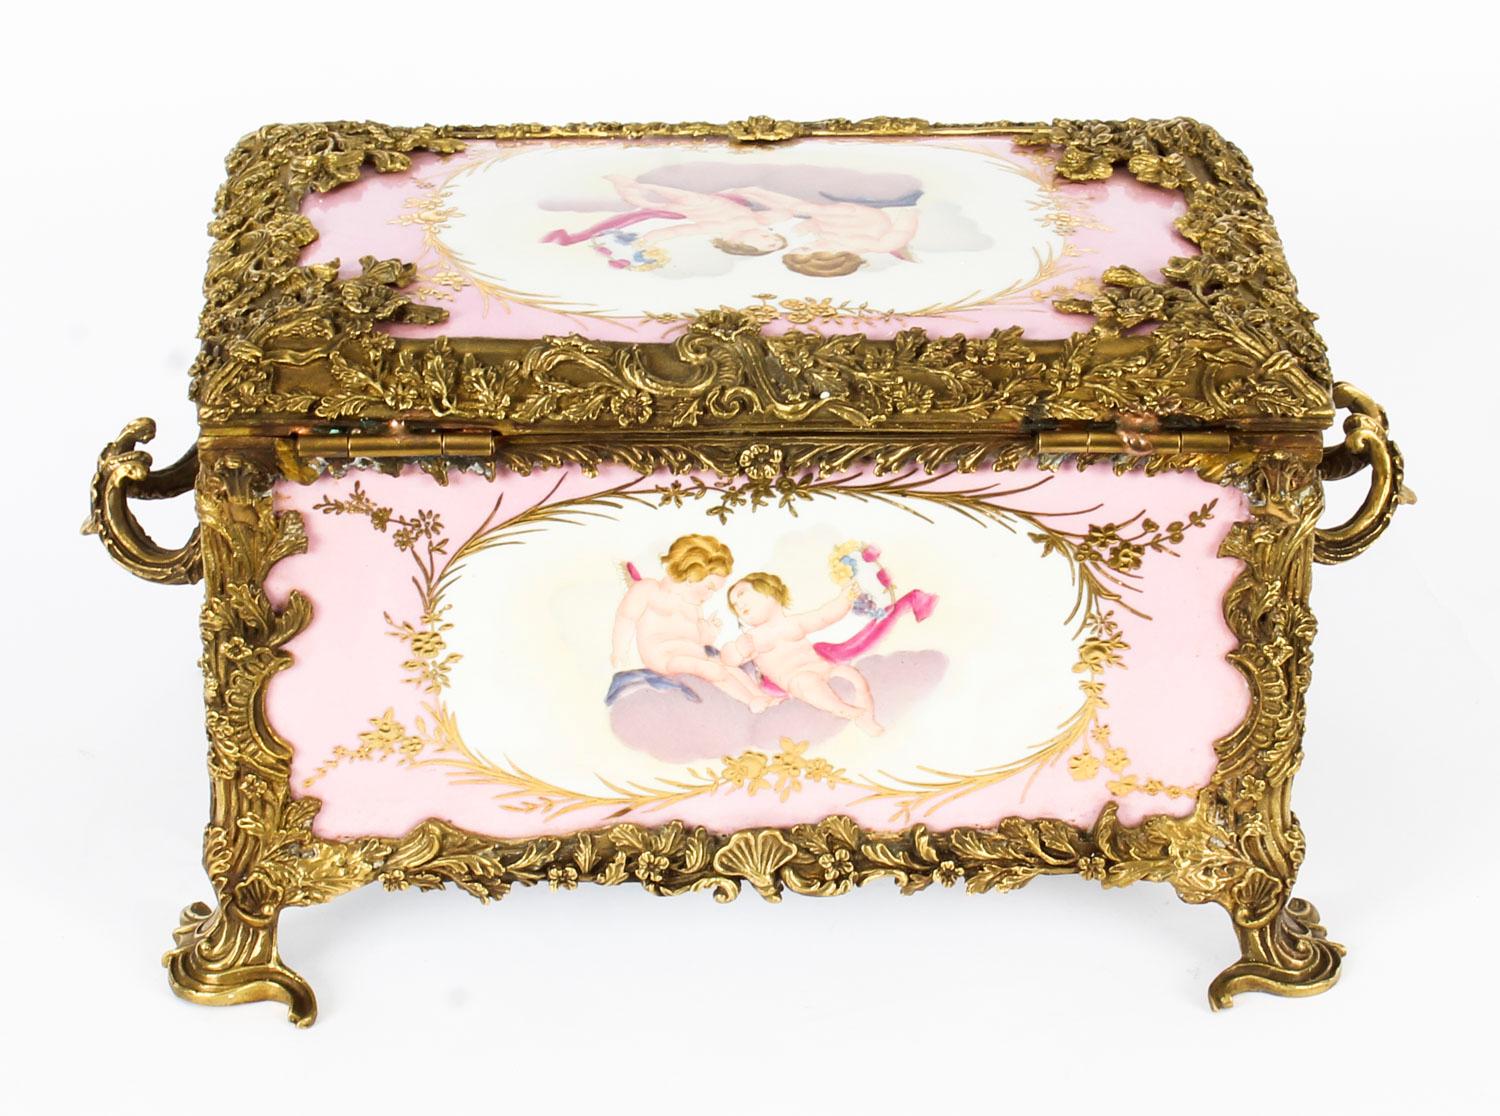 This is a beautiful large Vintage Russian Revival porcelain and ormolu mounted jewellery casket in rose pink, dating from the last quarter of the 20th century.

This highly decorative piece is hand painted with cherubs and musical instruments, has a